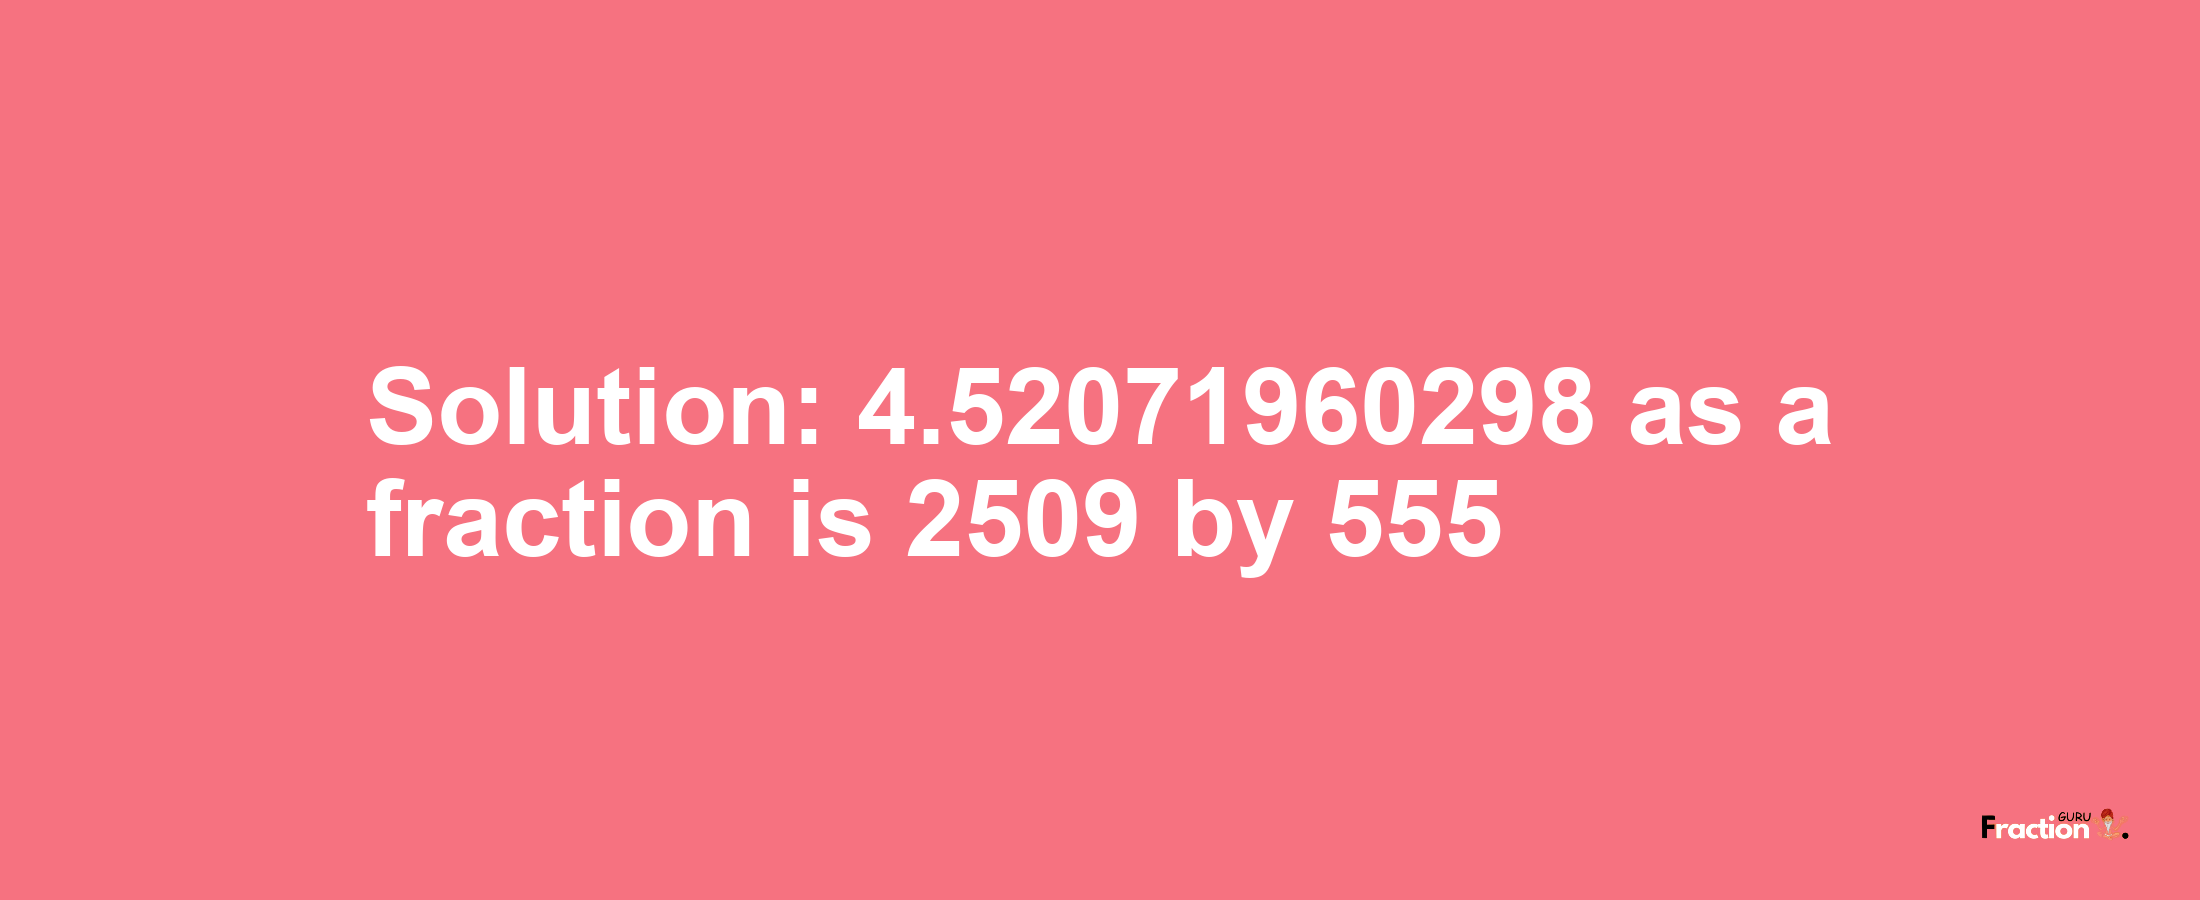 Solution:4.52071960298 as a fraction is 2509/555